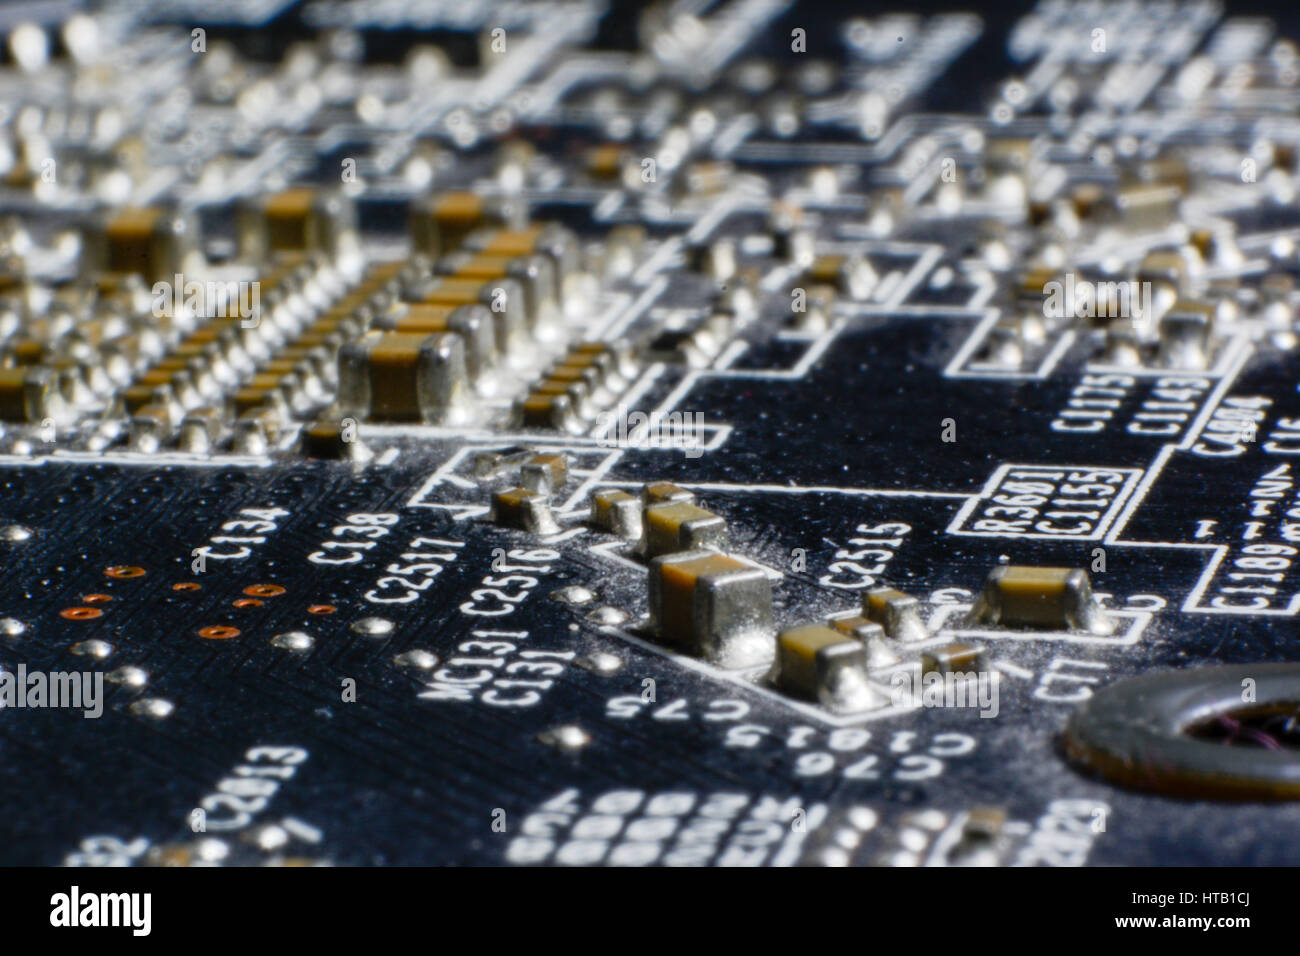 Surface-mount dusty smd components on used electronic circuit board close-up. Stock Photo